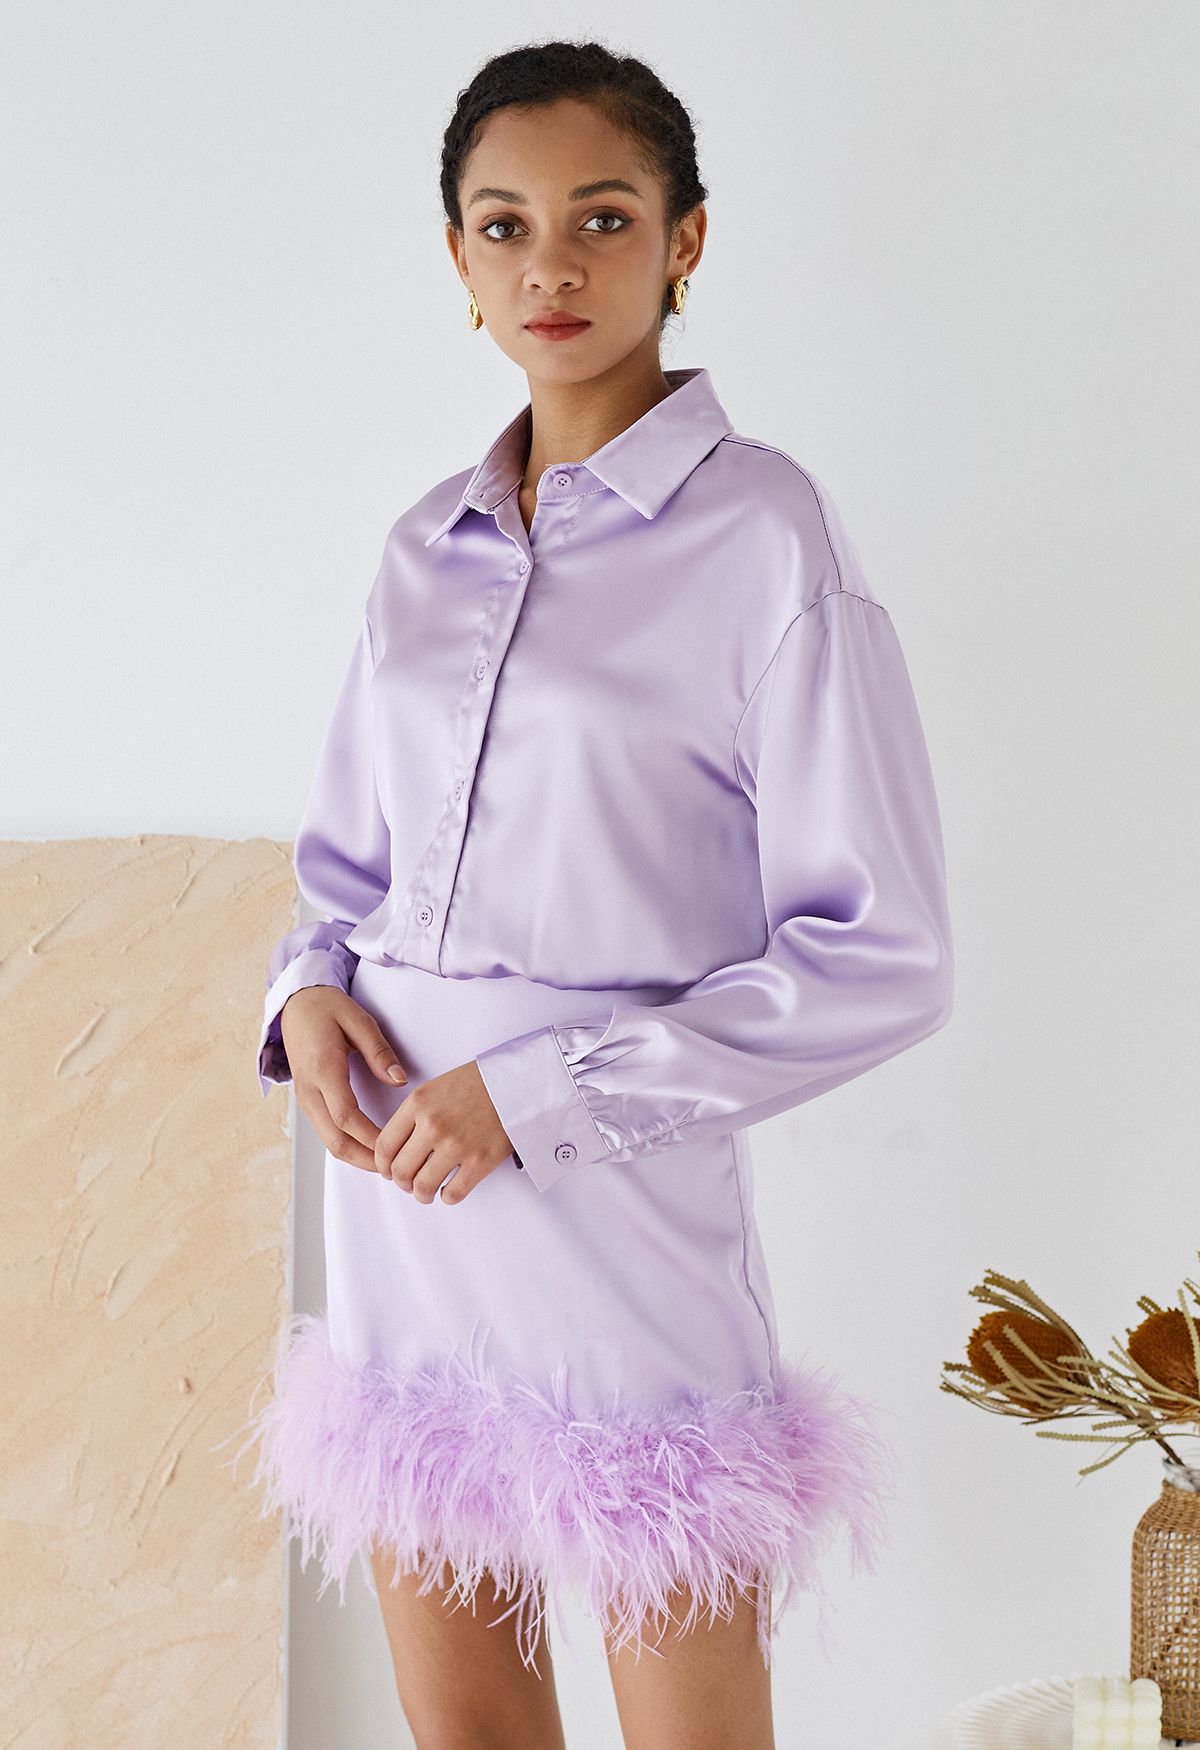 Louis Vuitton Purple Silk Ruched Ruffled Dress With Bow 